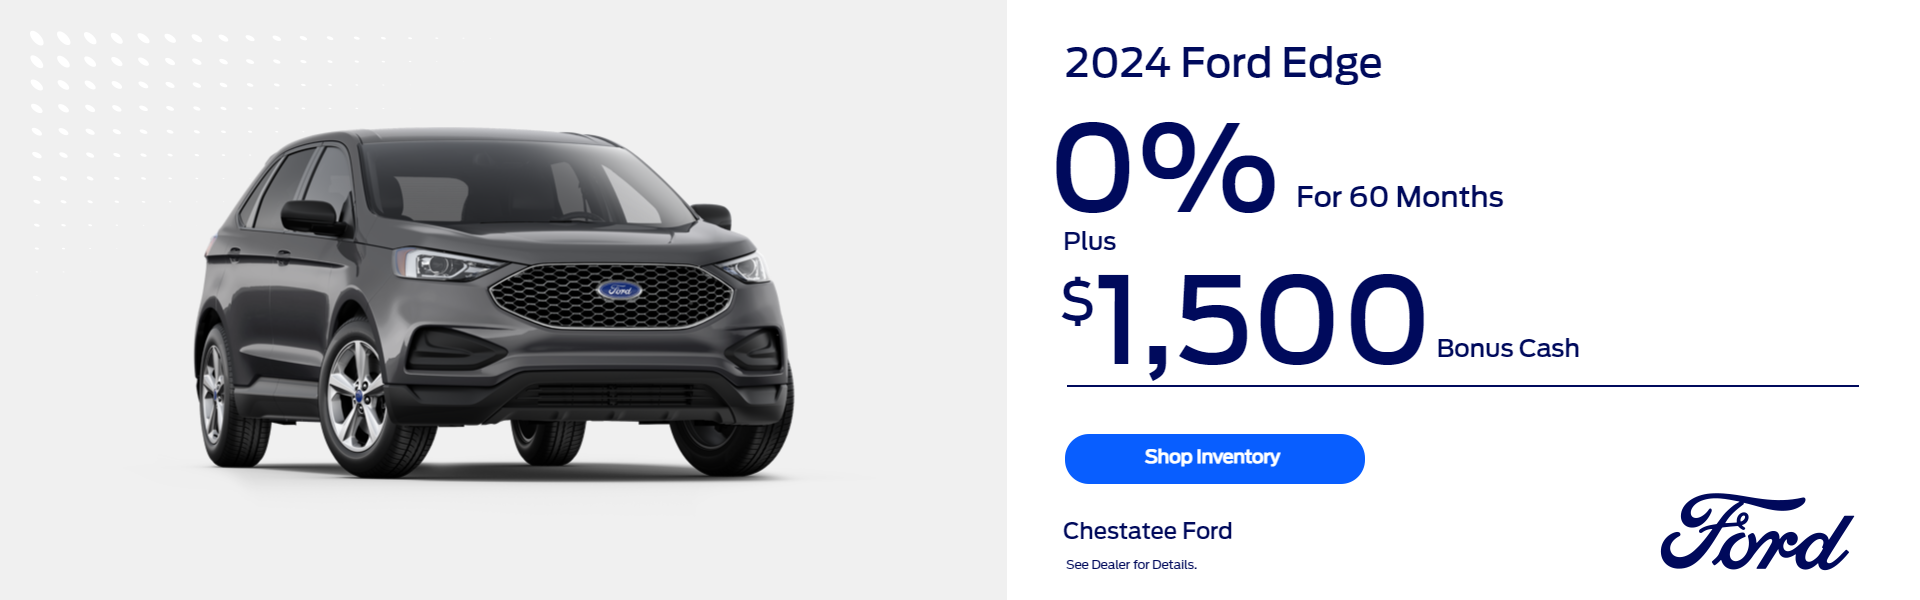 0% for 60 months Ford Edge